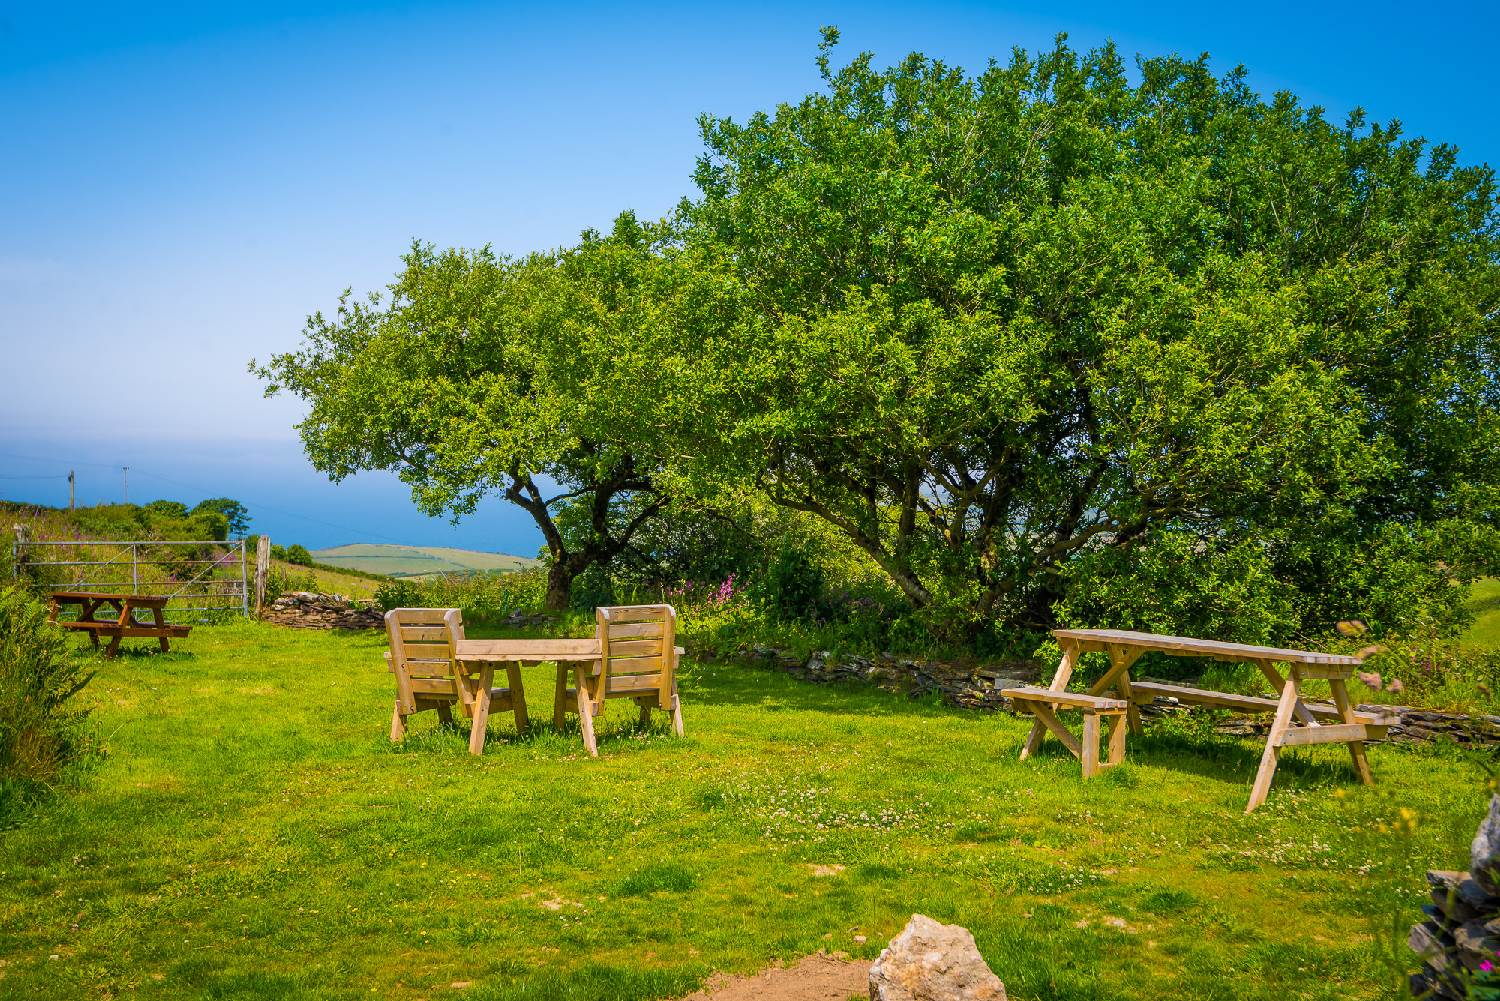 Sea view breakfast garden at Polrunny Farm holiday cottages, Cornwall